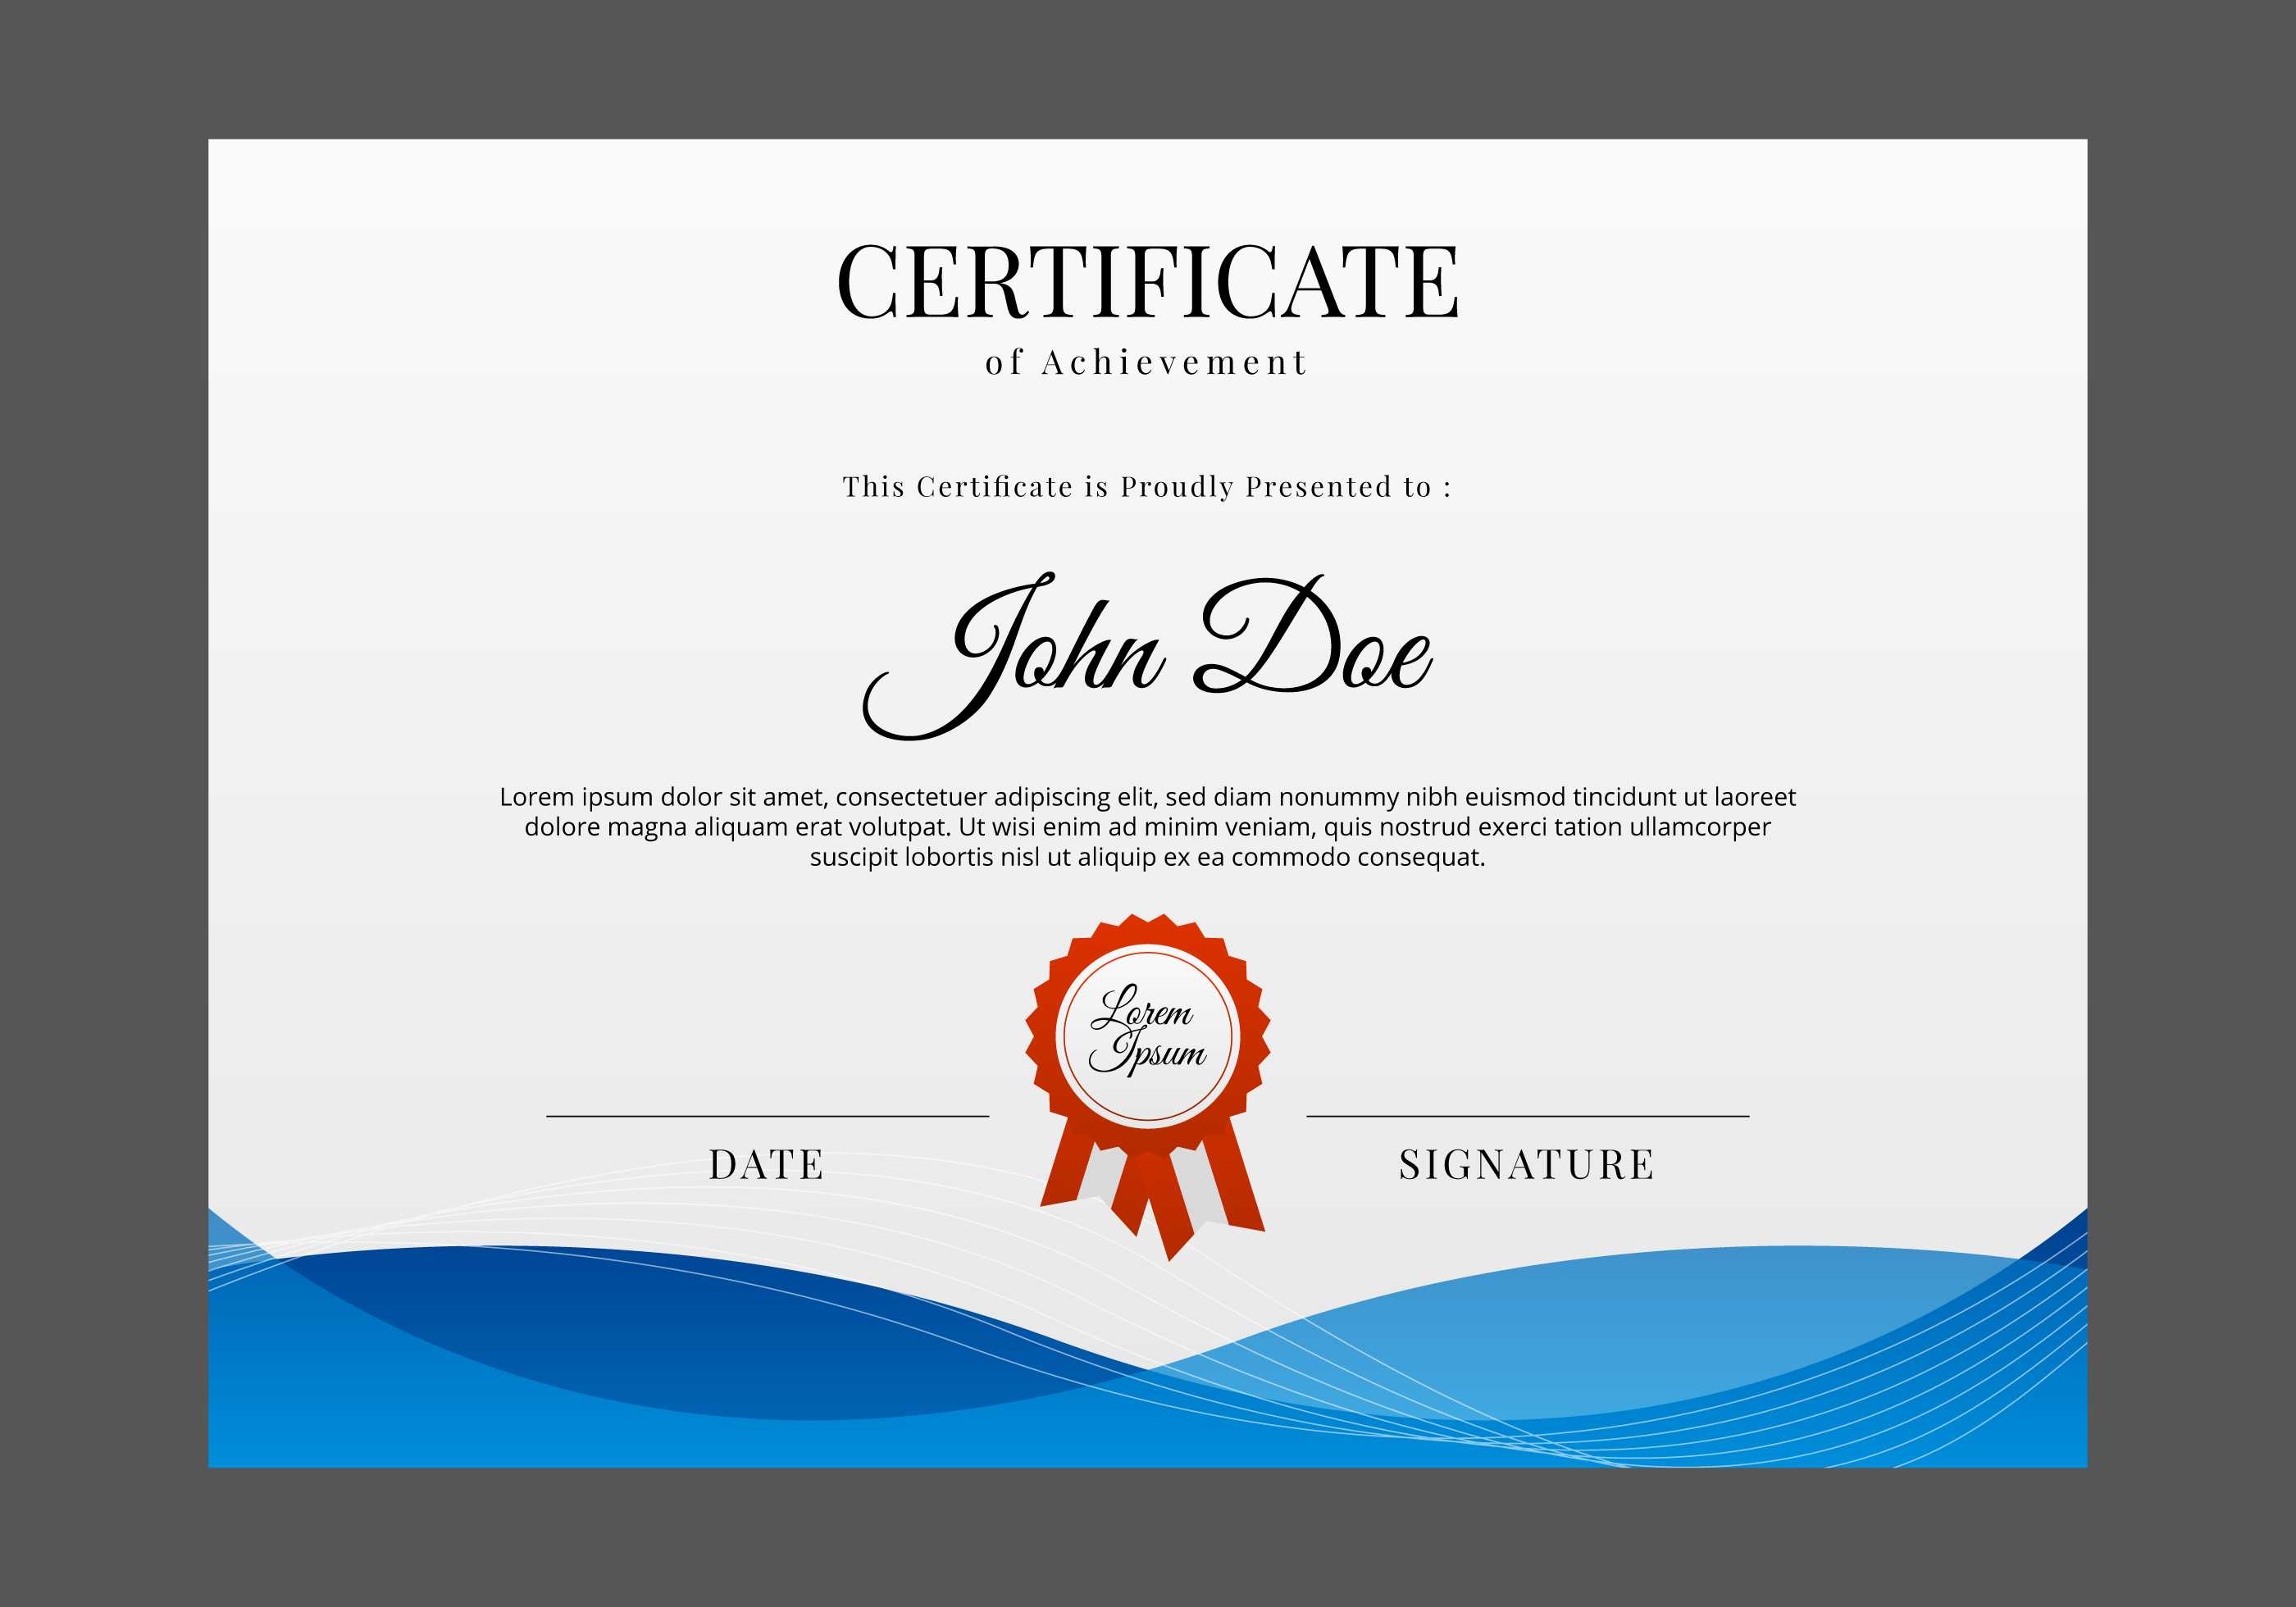 Certificate Design Free Vector Art – (10,170 Free Downloads) Within Design A Certificate Template